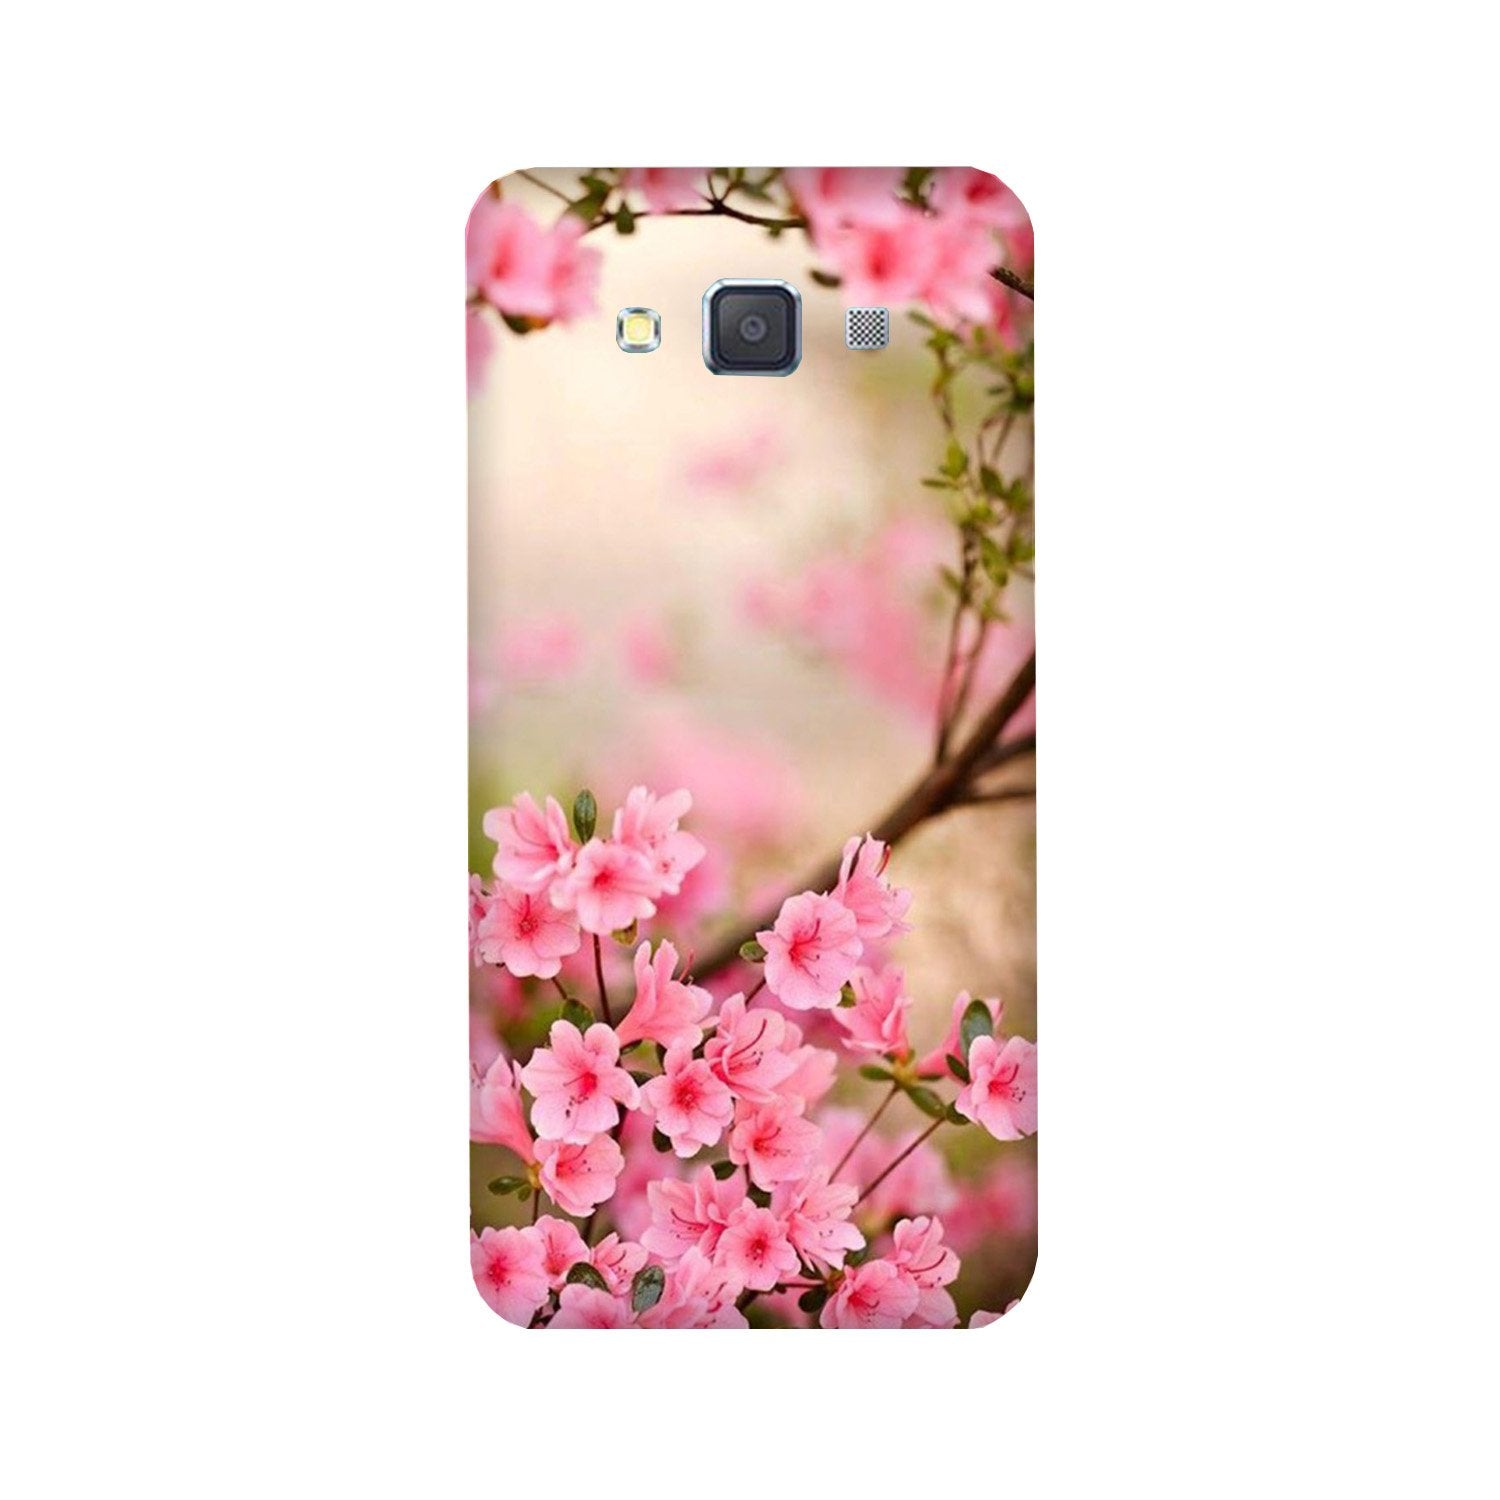 Pink flowers Case for Galaxy ON7/ON7 Pro